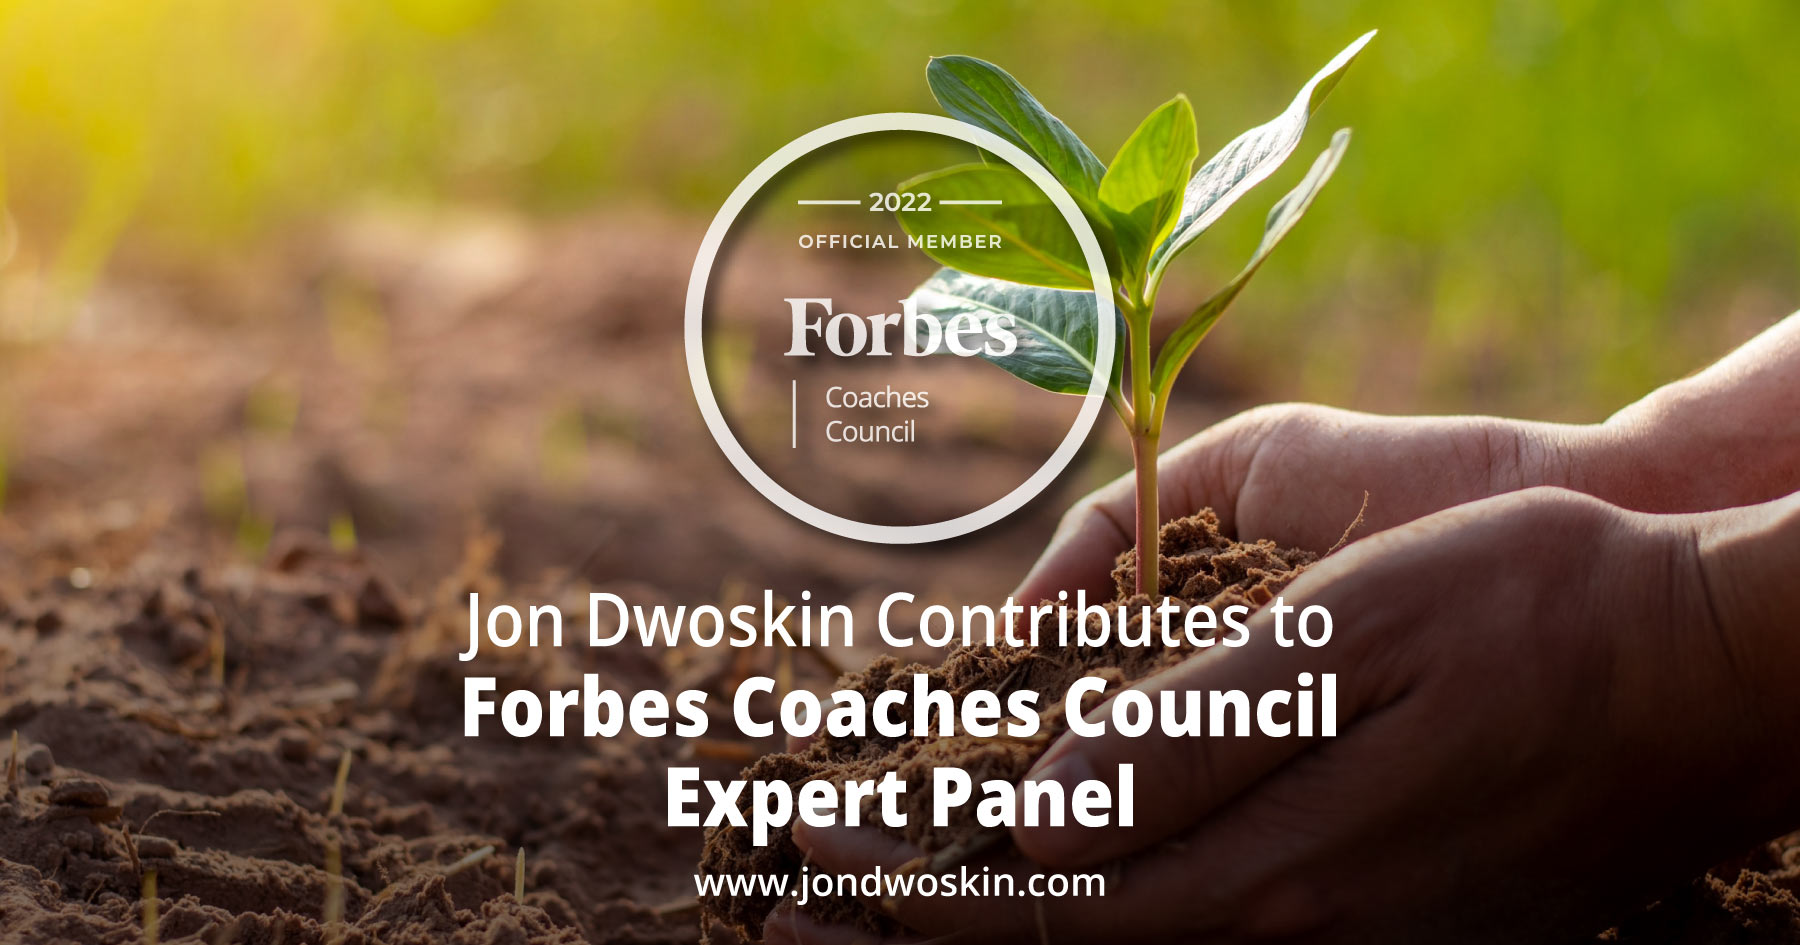 Jon Dwoskin Contributes to Forbes Coaches Council Expert Panel: 14 Warning Signs A Company May Be Scaling Too Quickly